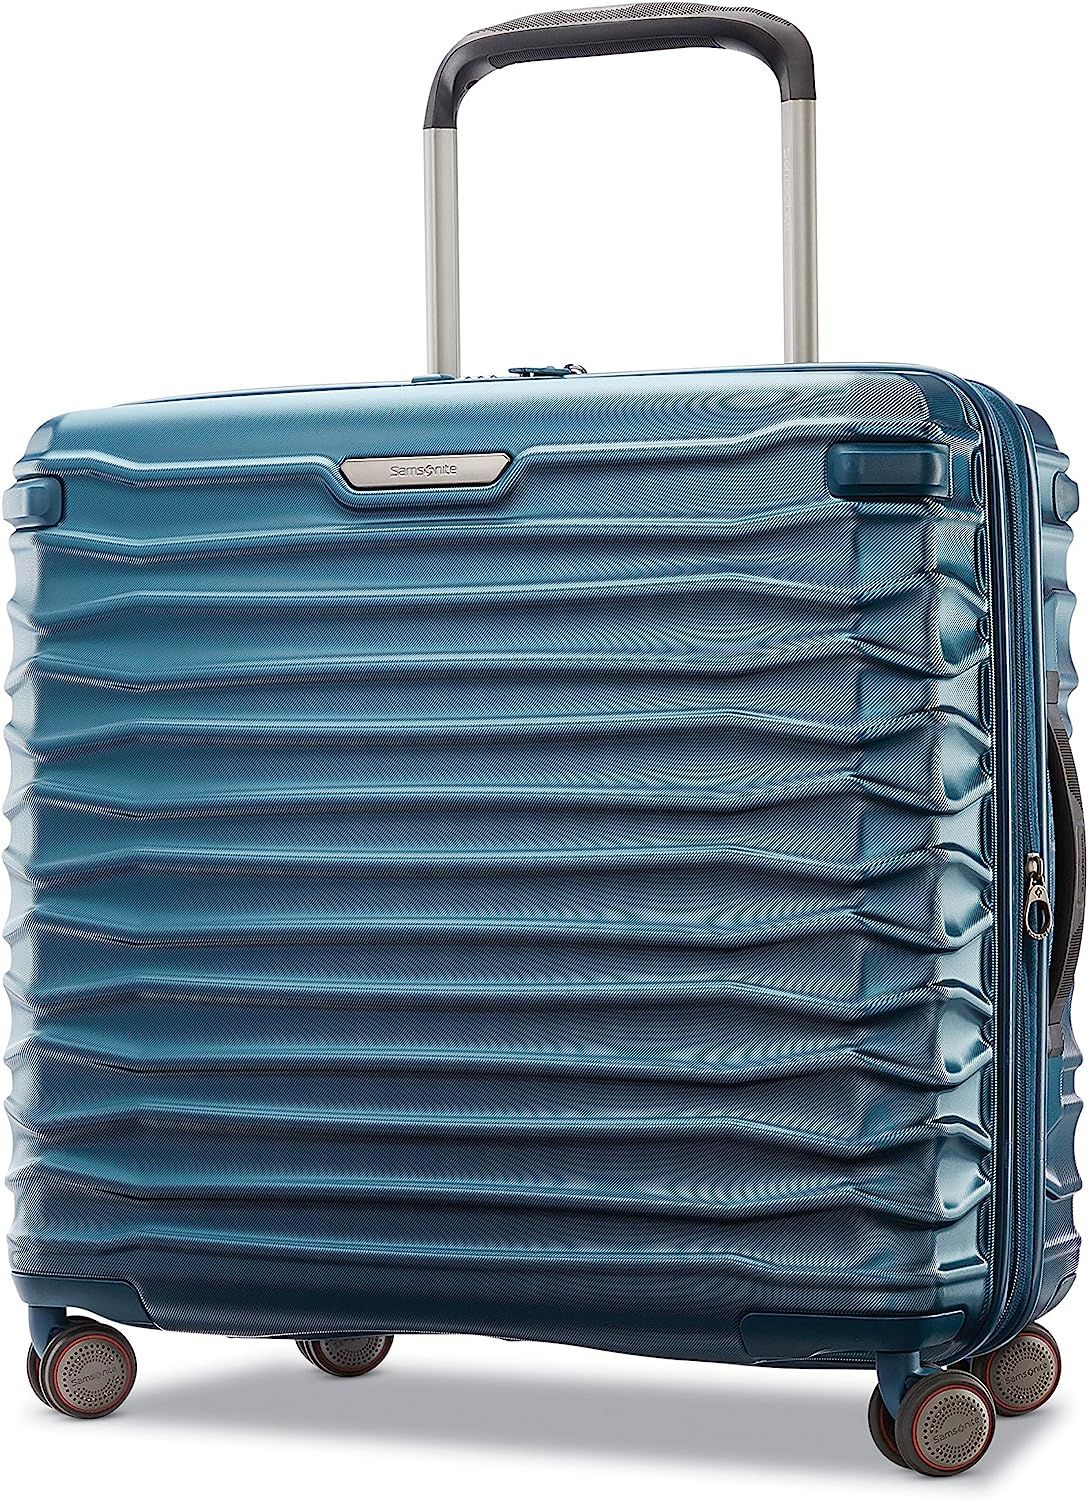 Samsonite Stryde 2 Hardside Expandable Luggage with Spinners | Deep Teal | Medium Glider | Amazon (US)